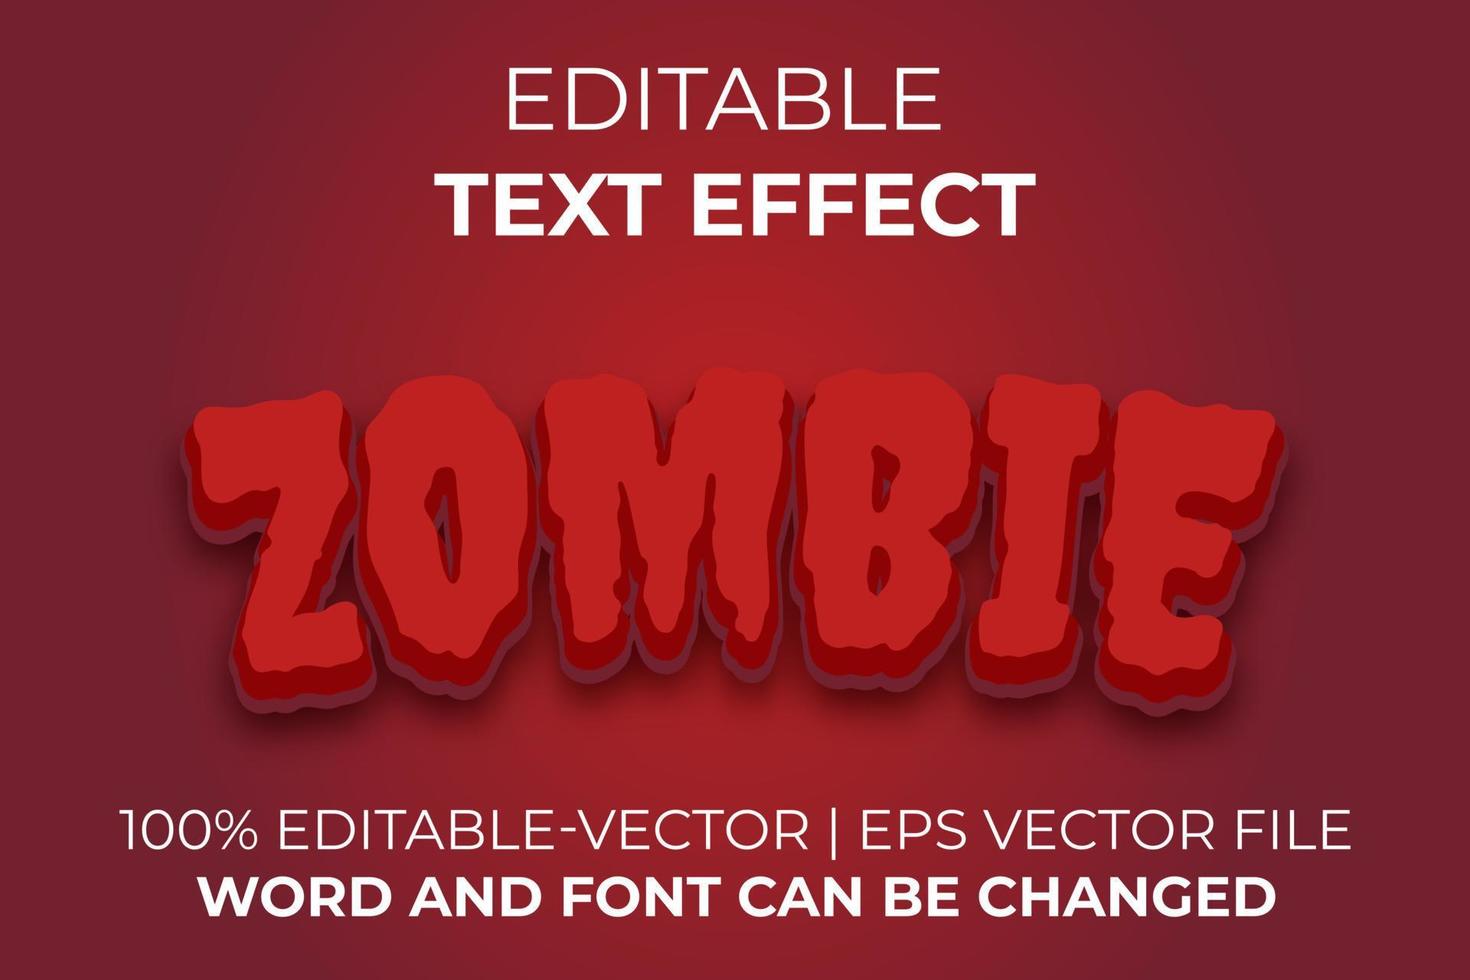 Zombie text effect, easy to edit vector